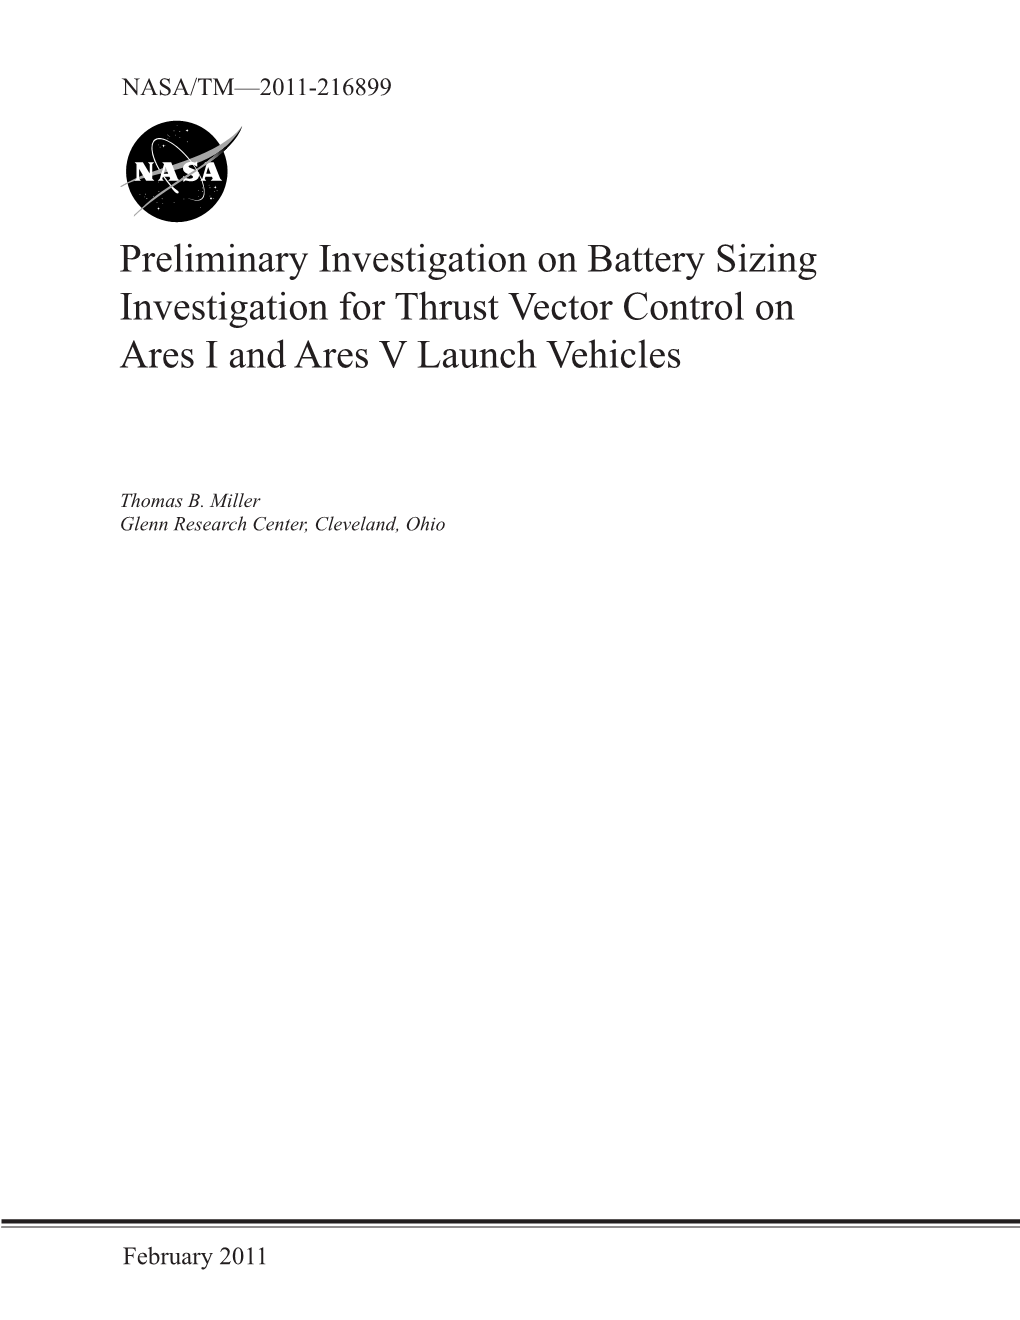 Preliminary Investigation on Battery Sizing Investigation for Thrust Vector Control on Ares I and Ares V Launch Vehicles